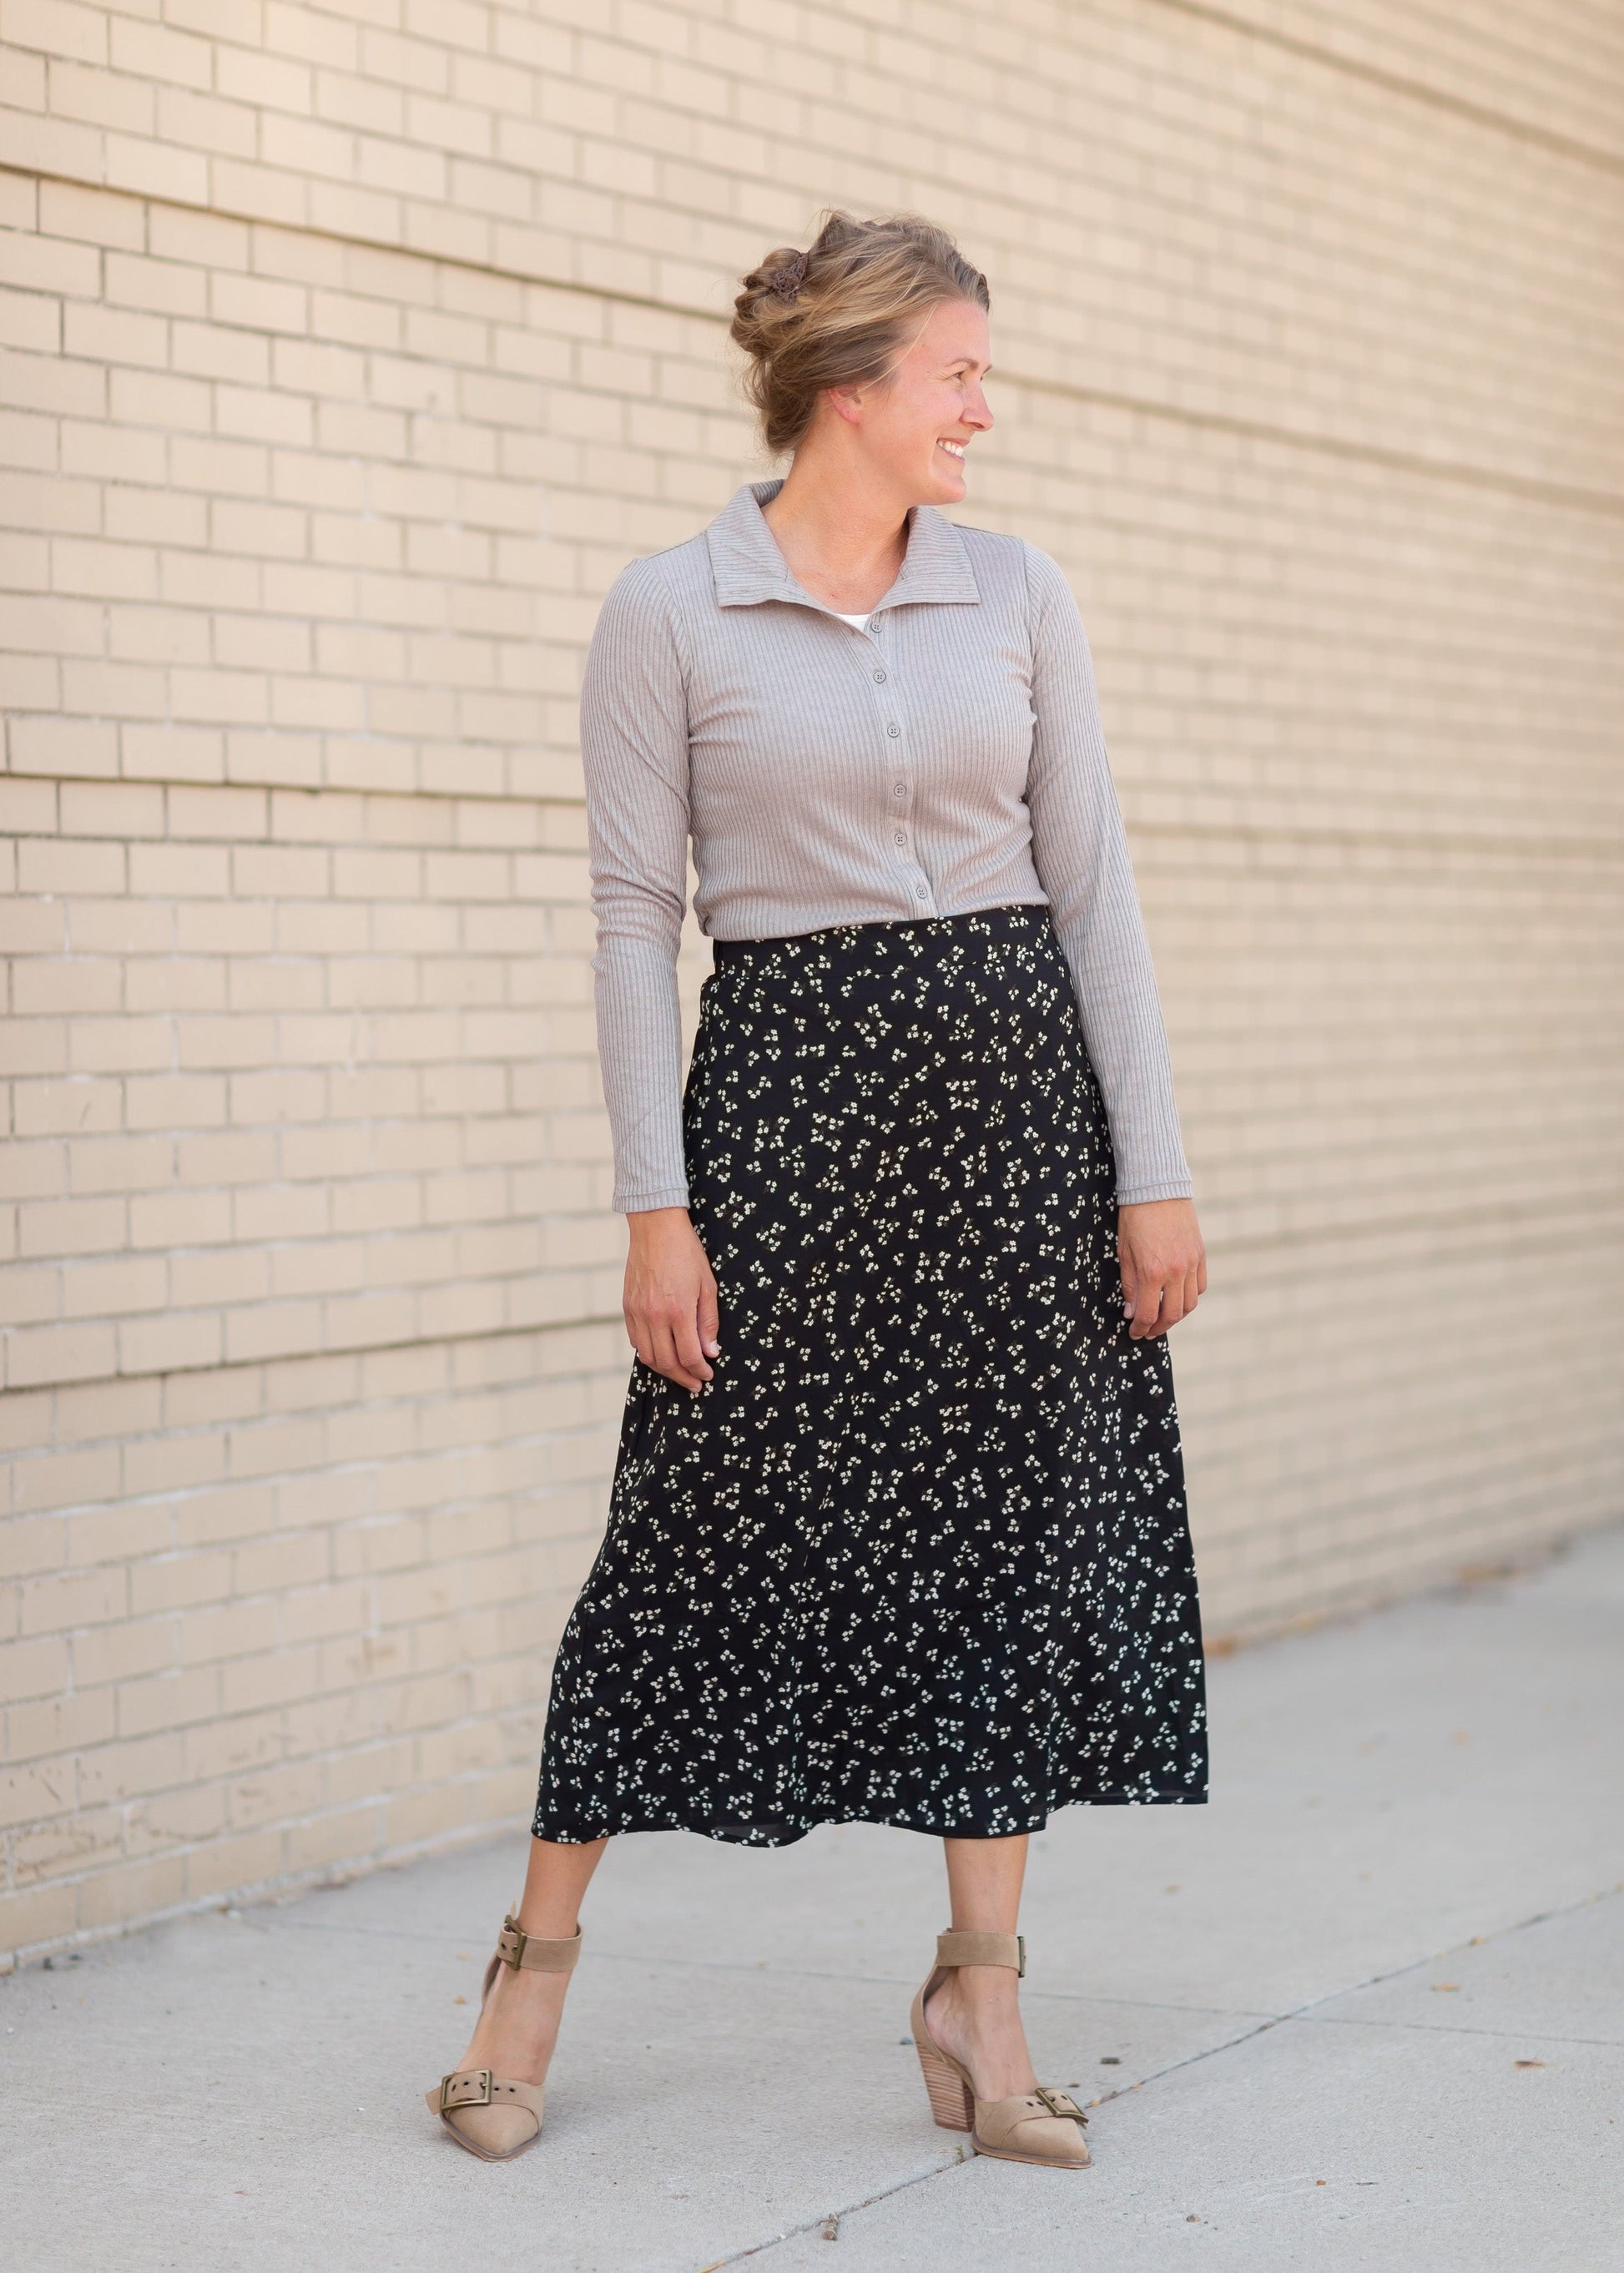 The Braylyn is an Inherit Design that is an a-line midi skirt that is black with white florals with a stretch waist and is so cute.